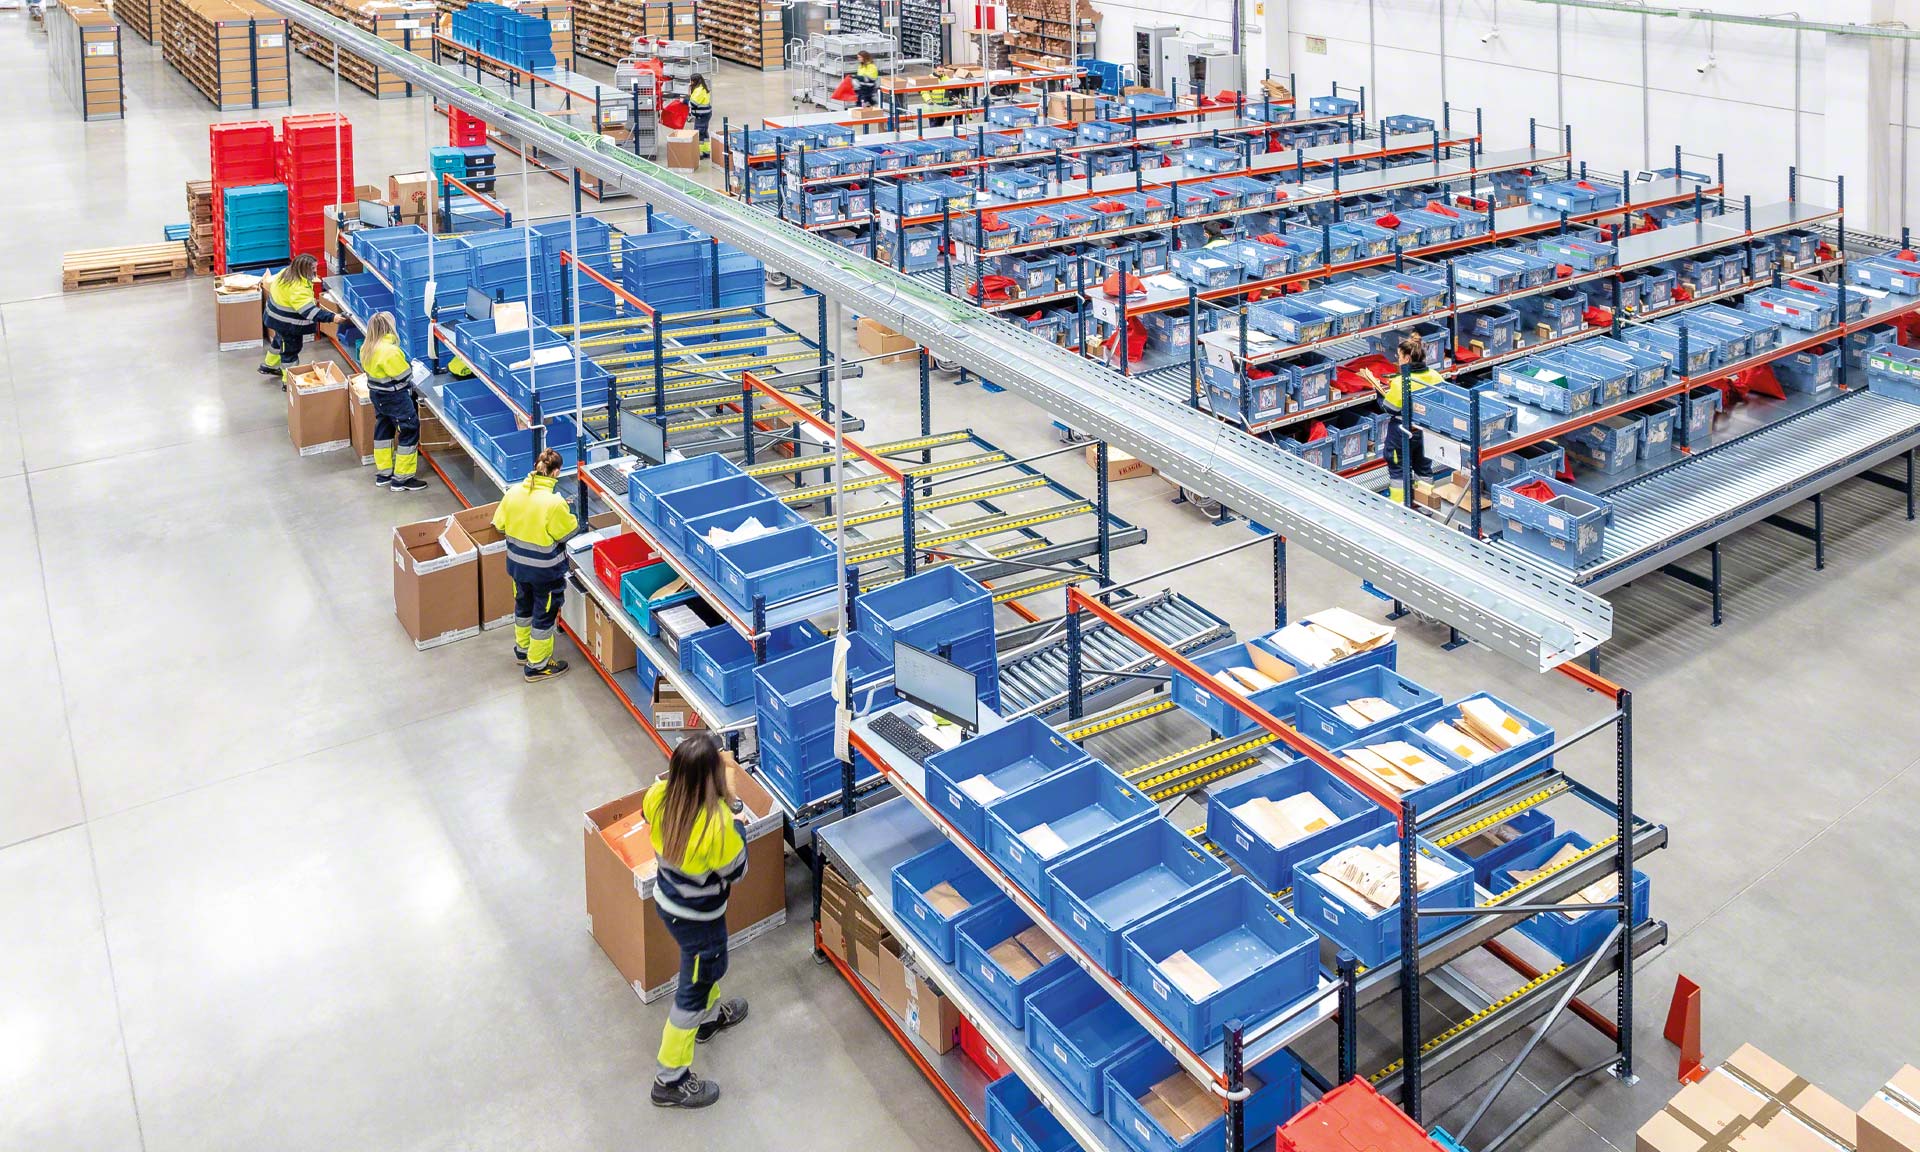 General Óptica installs an omnichannel warehouse with 4,000 daily orders